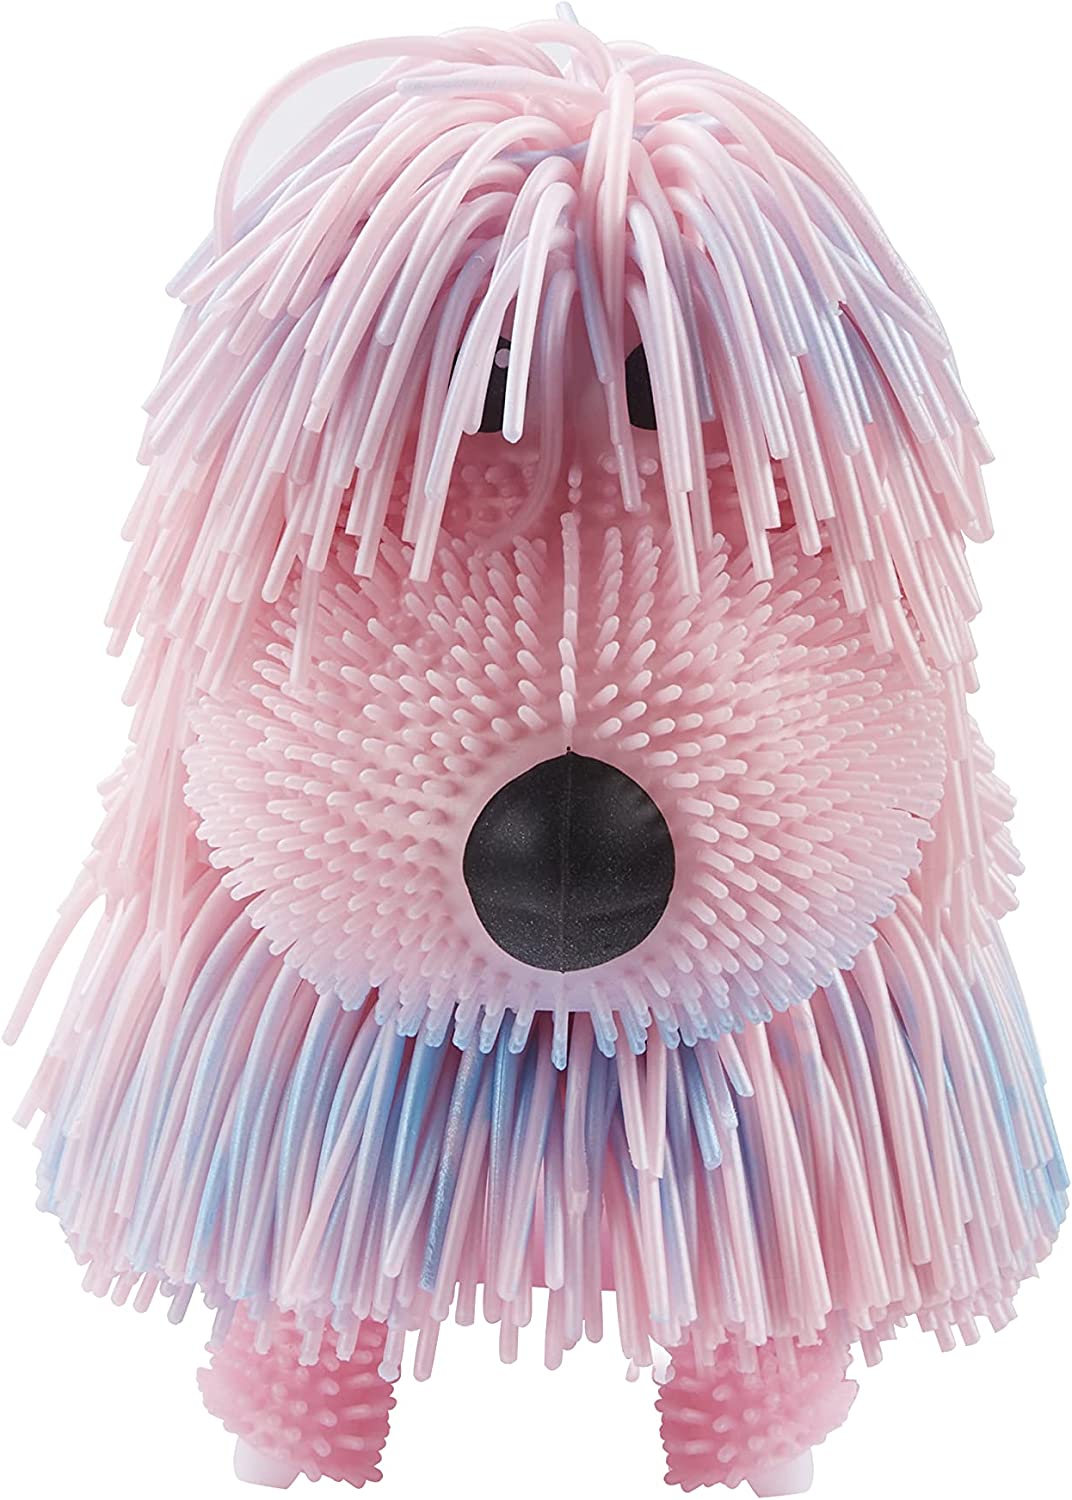 Jiggly Pets Pearlescent Pups - Pink